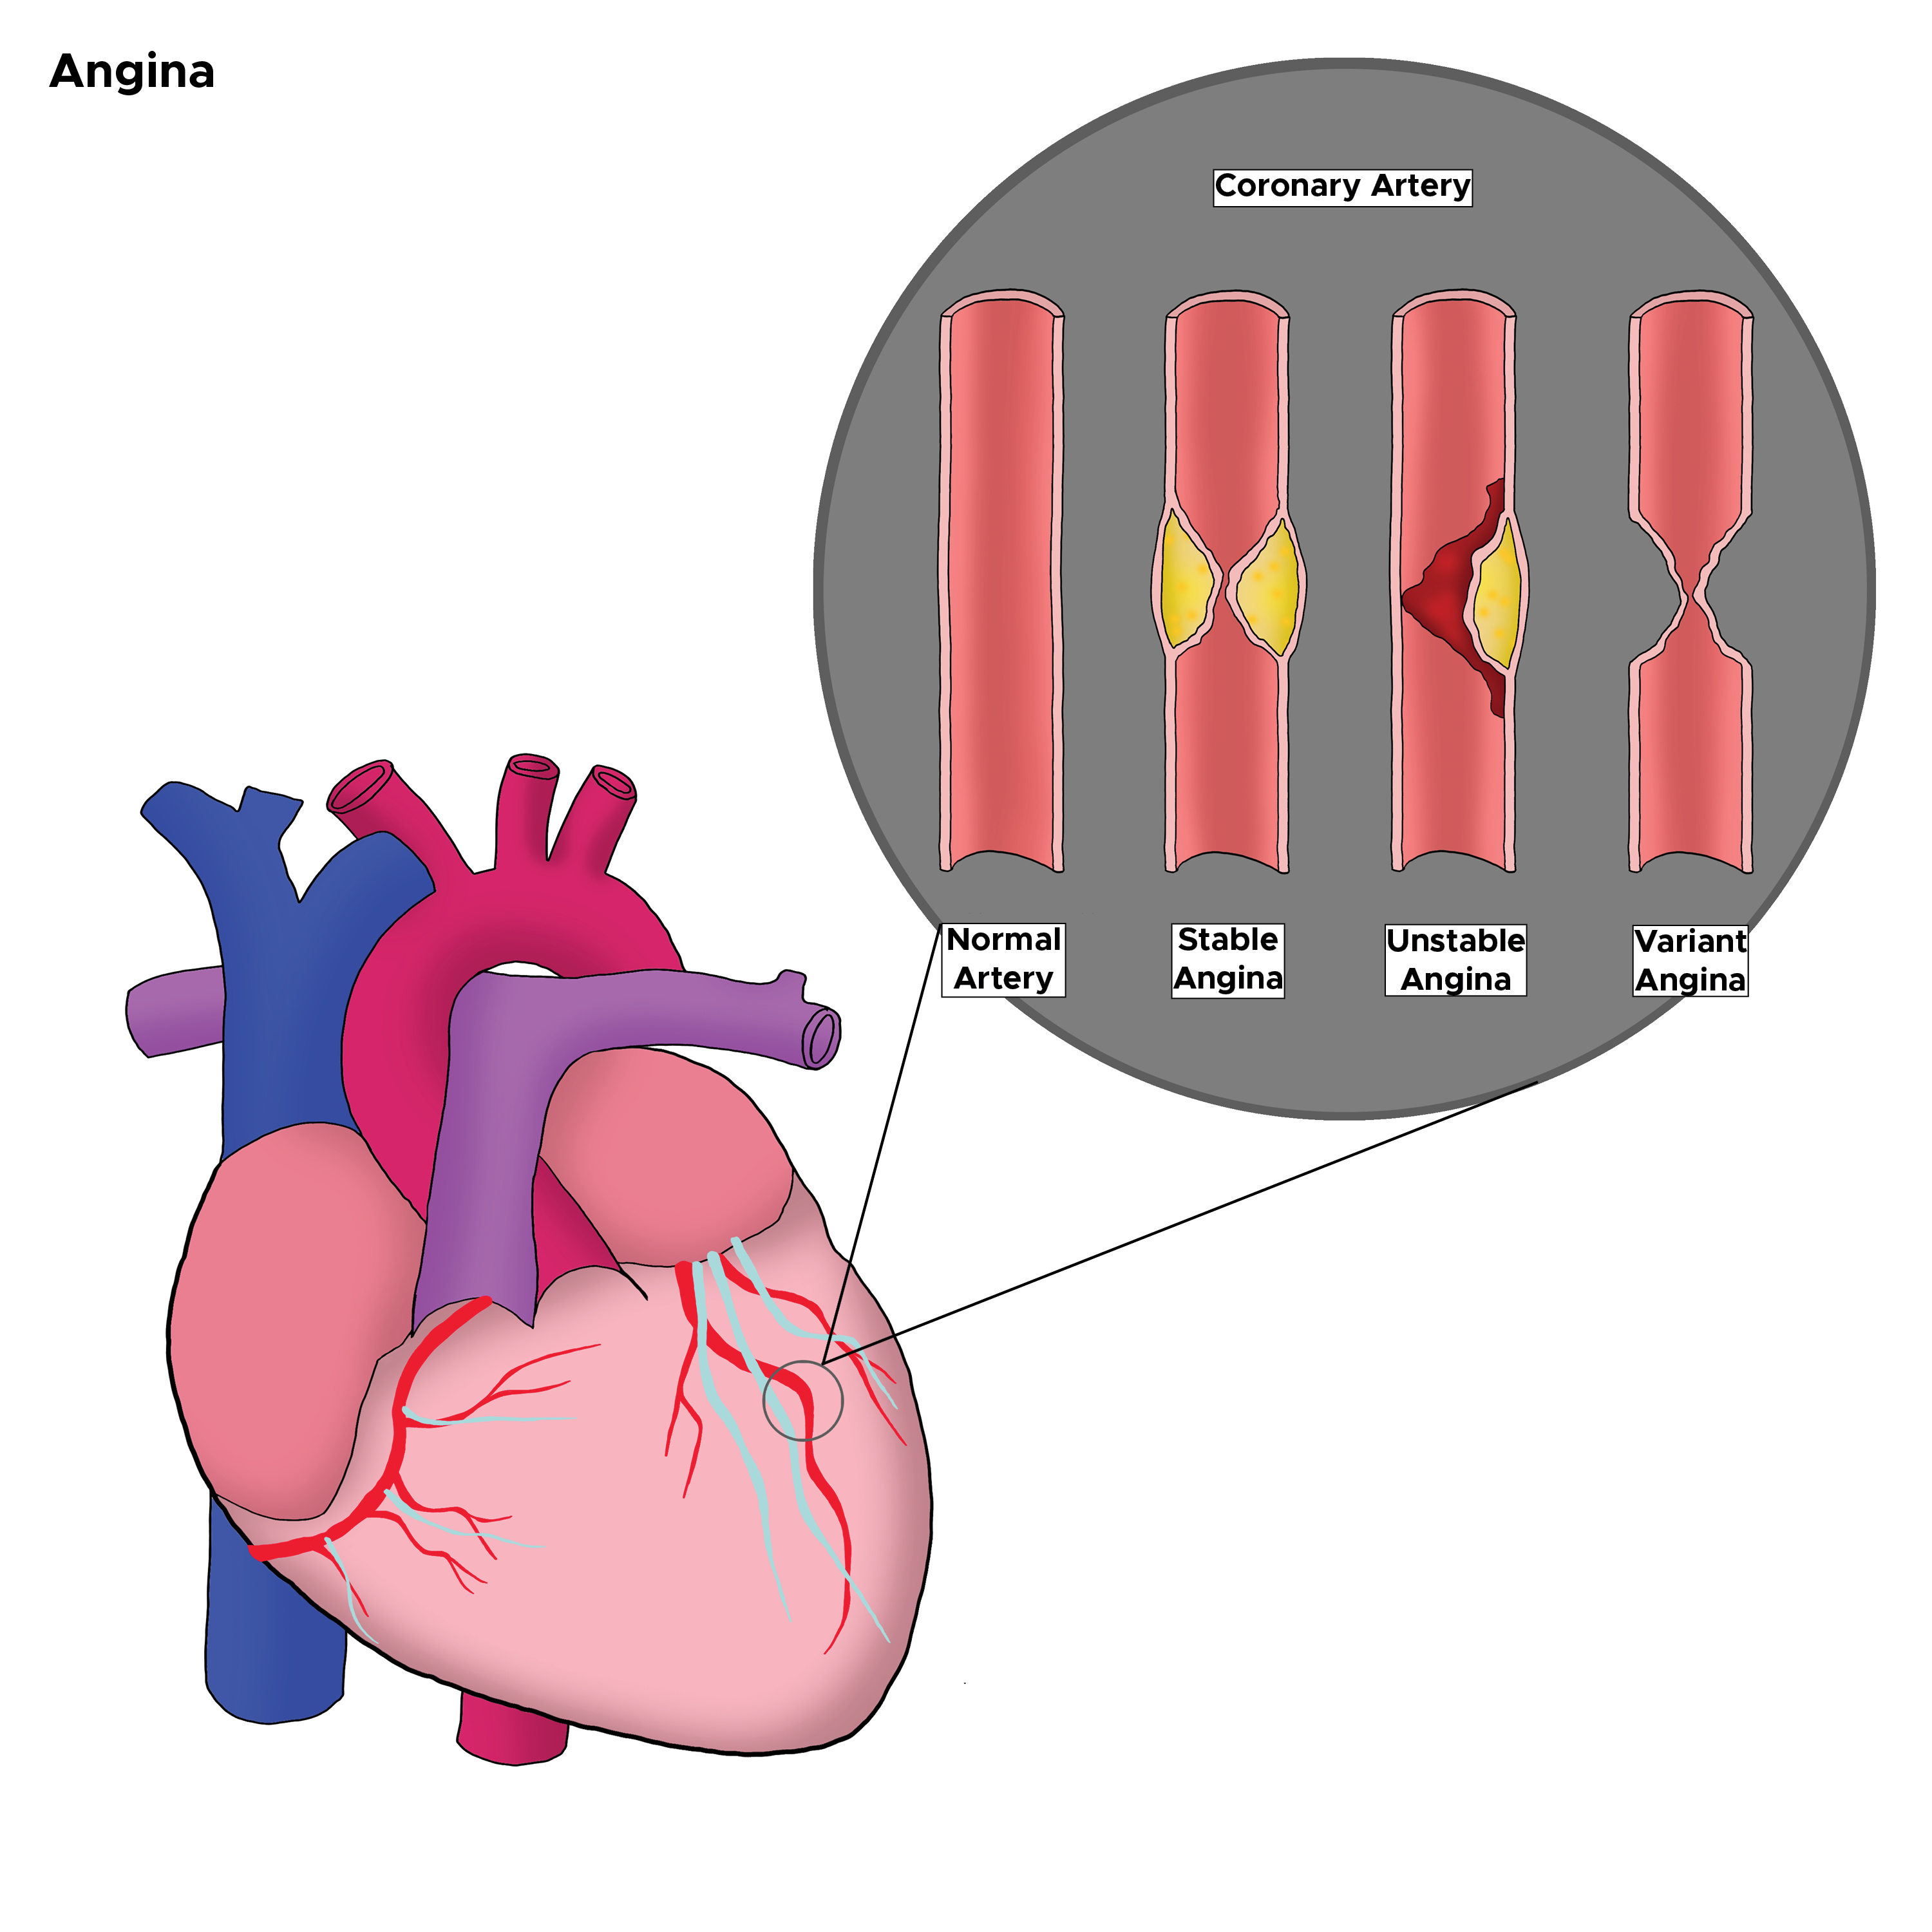 <p>Types of Angina in the Coronary Artery. The illustration depicts stable angina, unstable angina, and variant angina.</p>